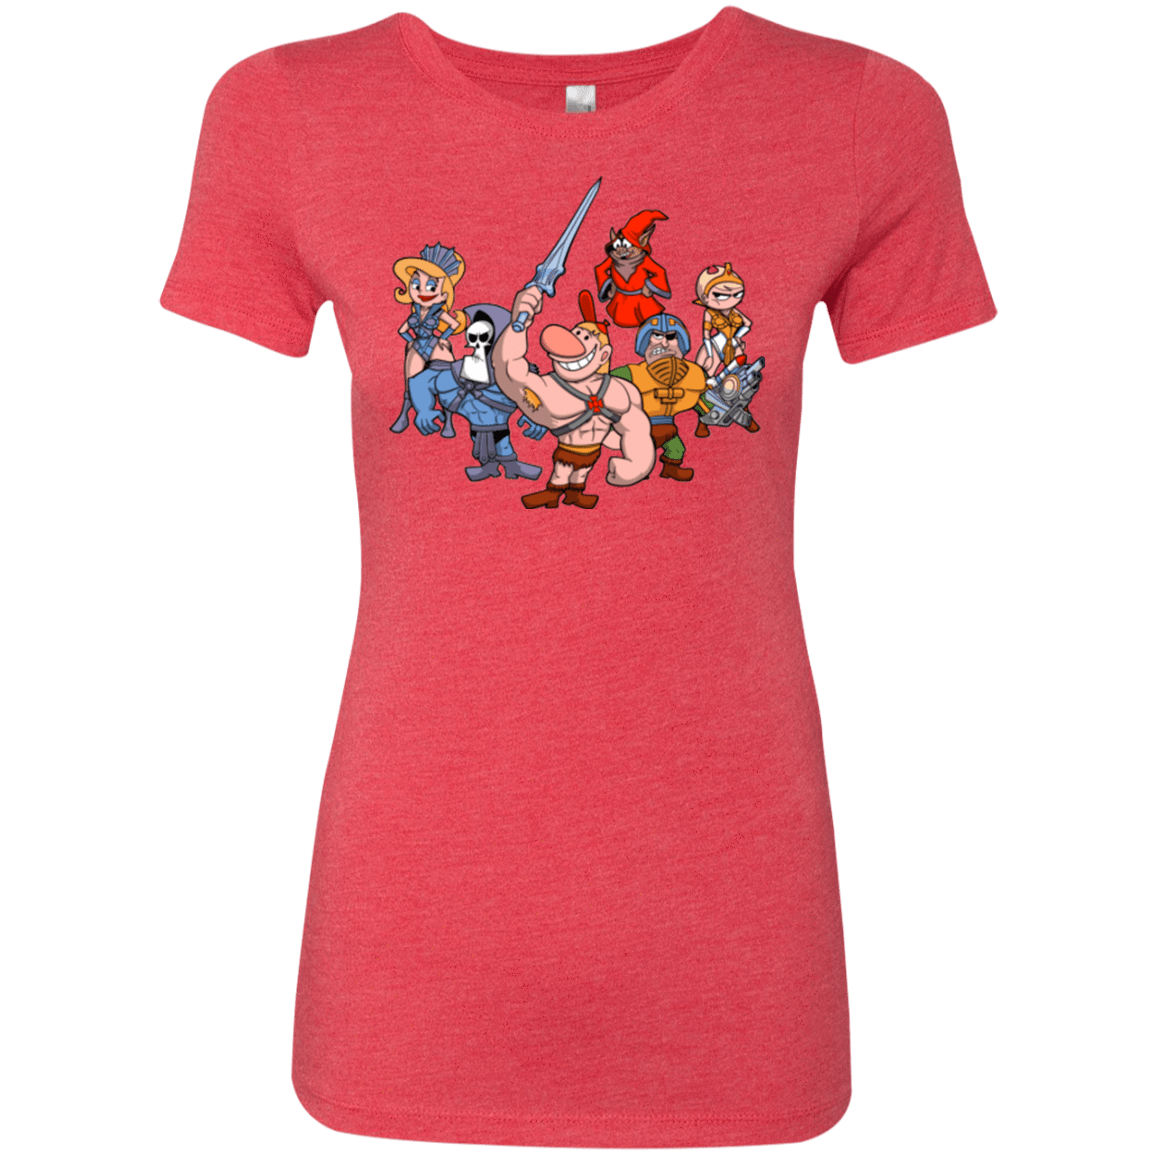 T-Shirts Vintage Red / Small Masters of the Grimverse Women's Triblend T-Shirt